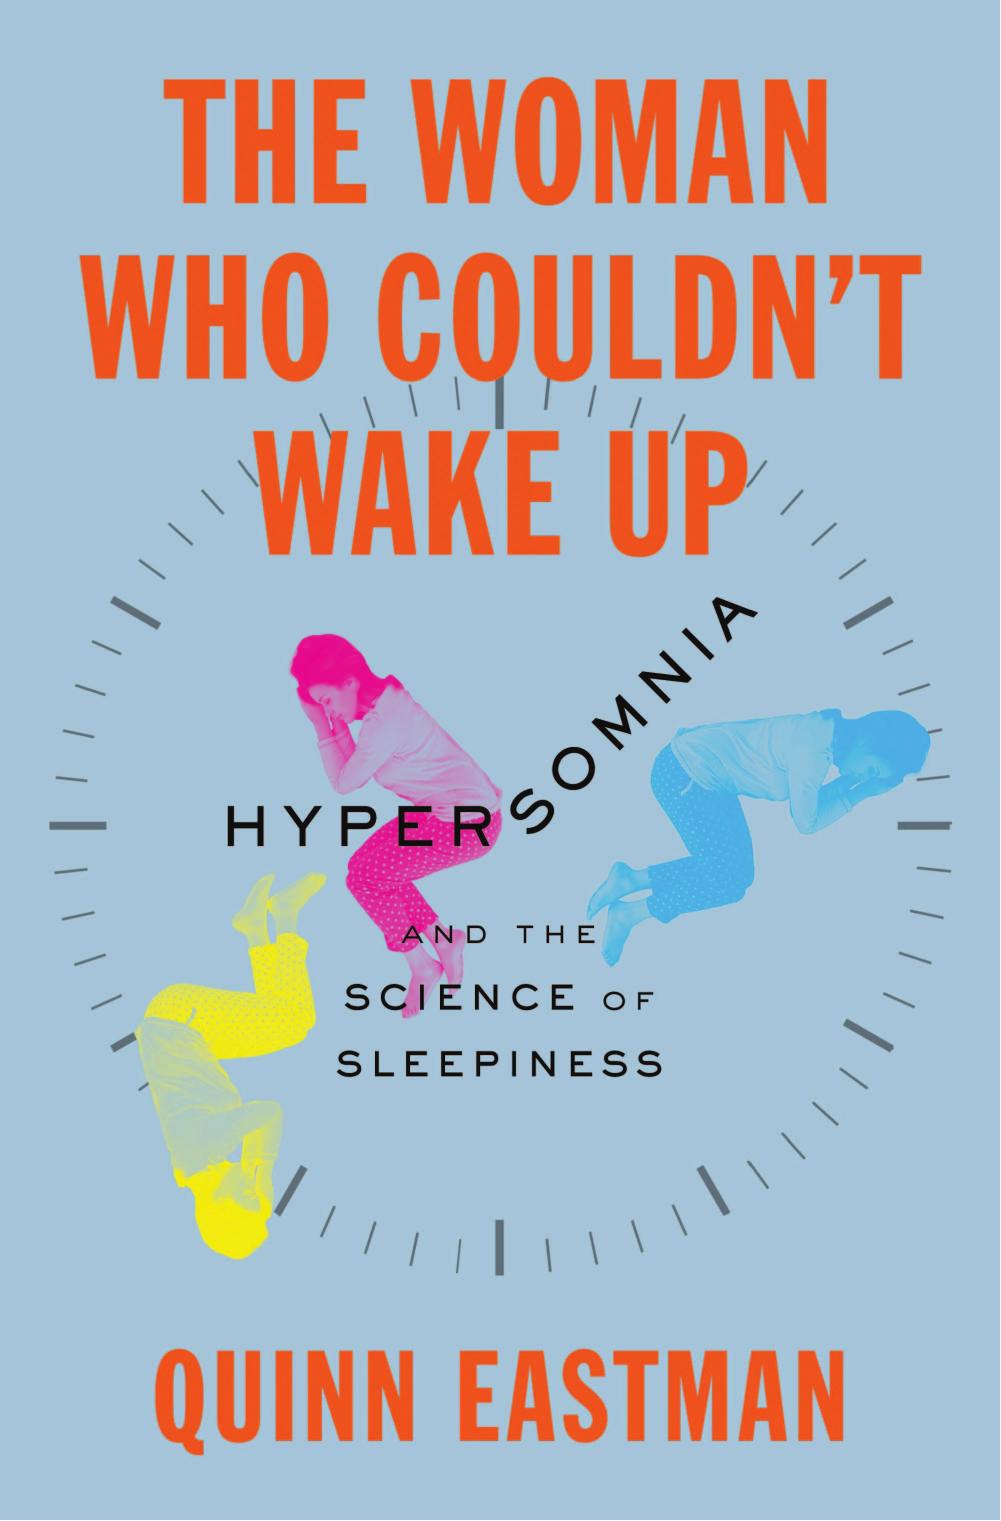 The Woman Who Couldn't Wake Up: Hypersomnia and the Science of Sleepiness by Quinn Eastman